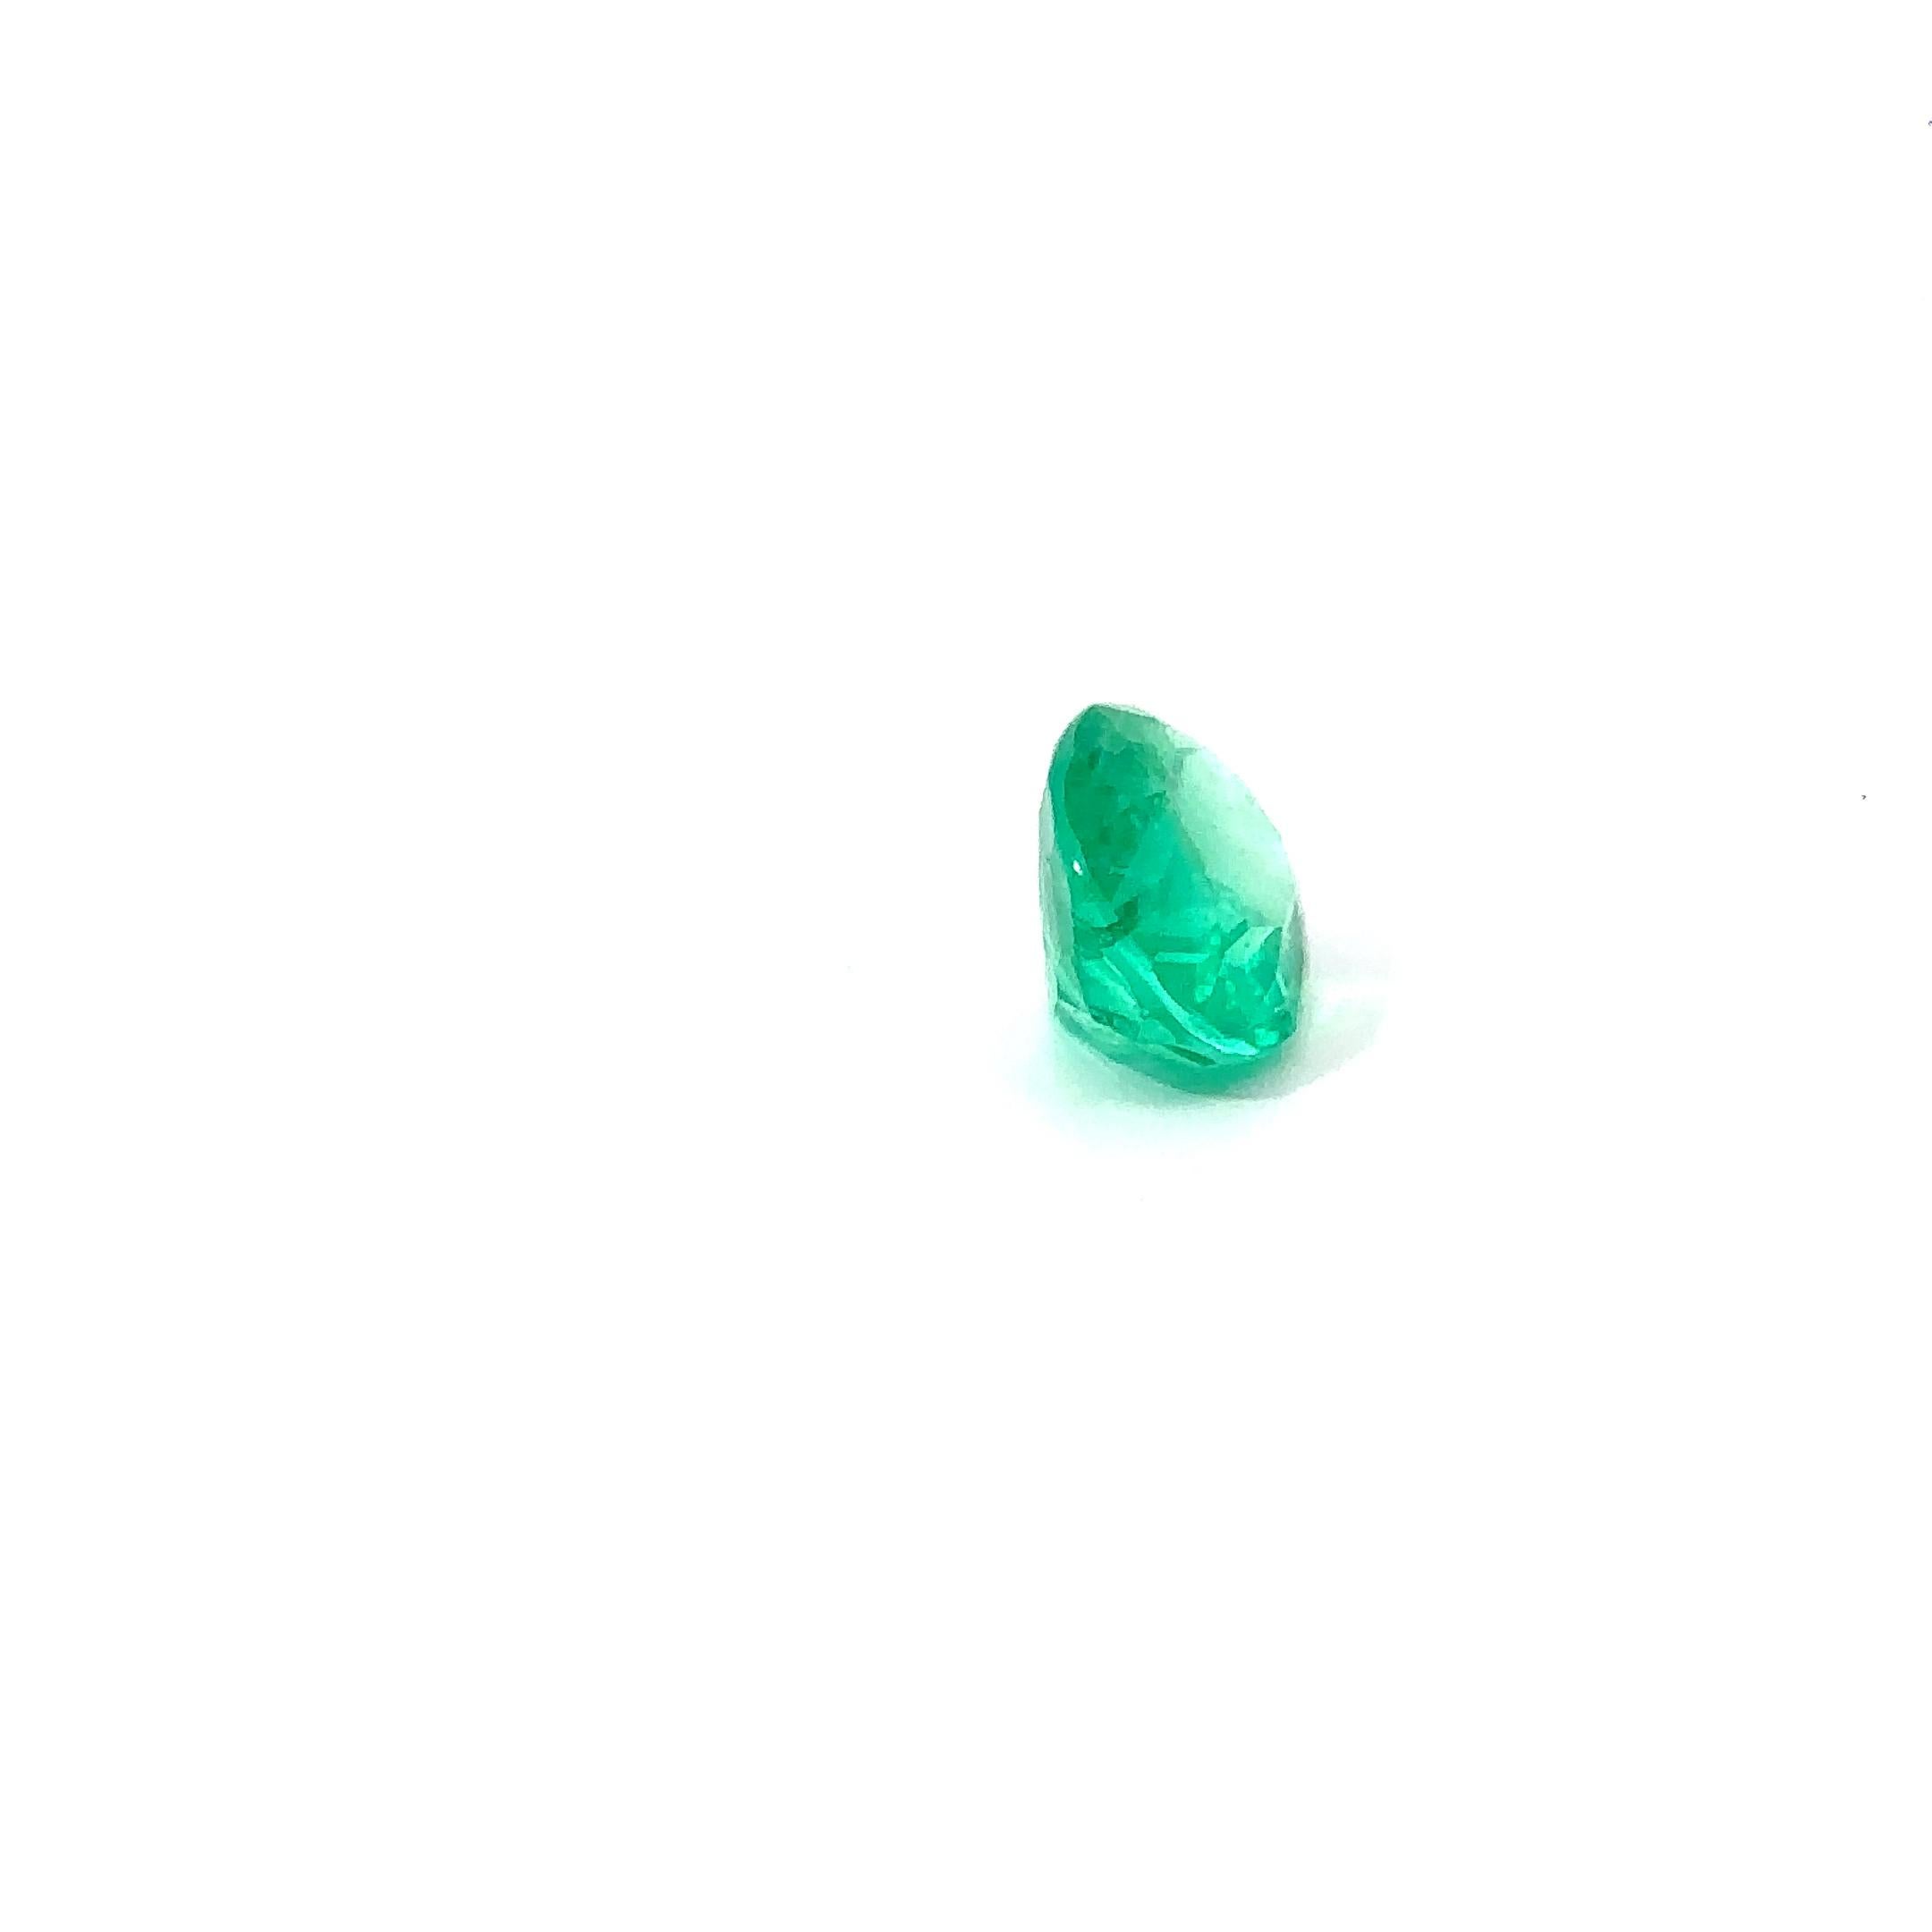 Natural Emerald 
Vivid Green 
Oval/Mod. Brilliant Cut
indications of minor clarity enhancement
Origin from Colombia.